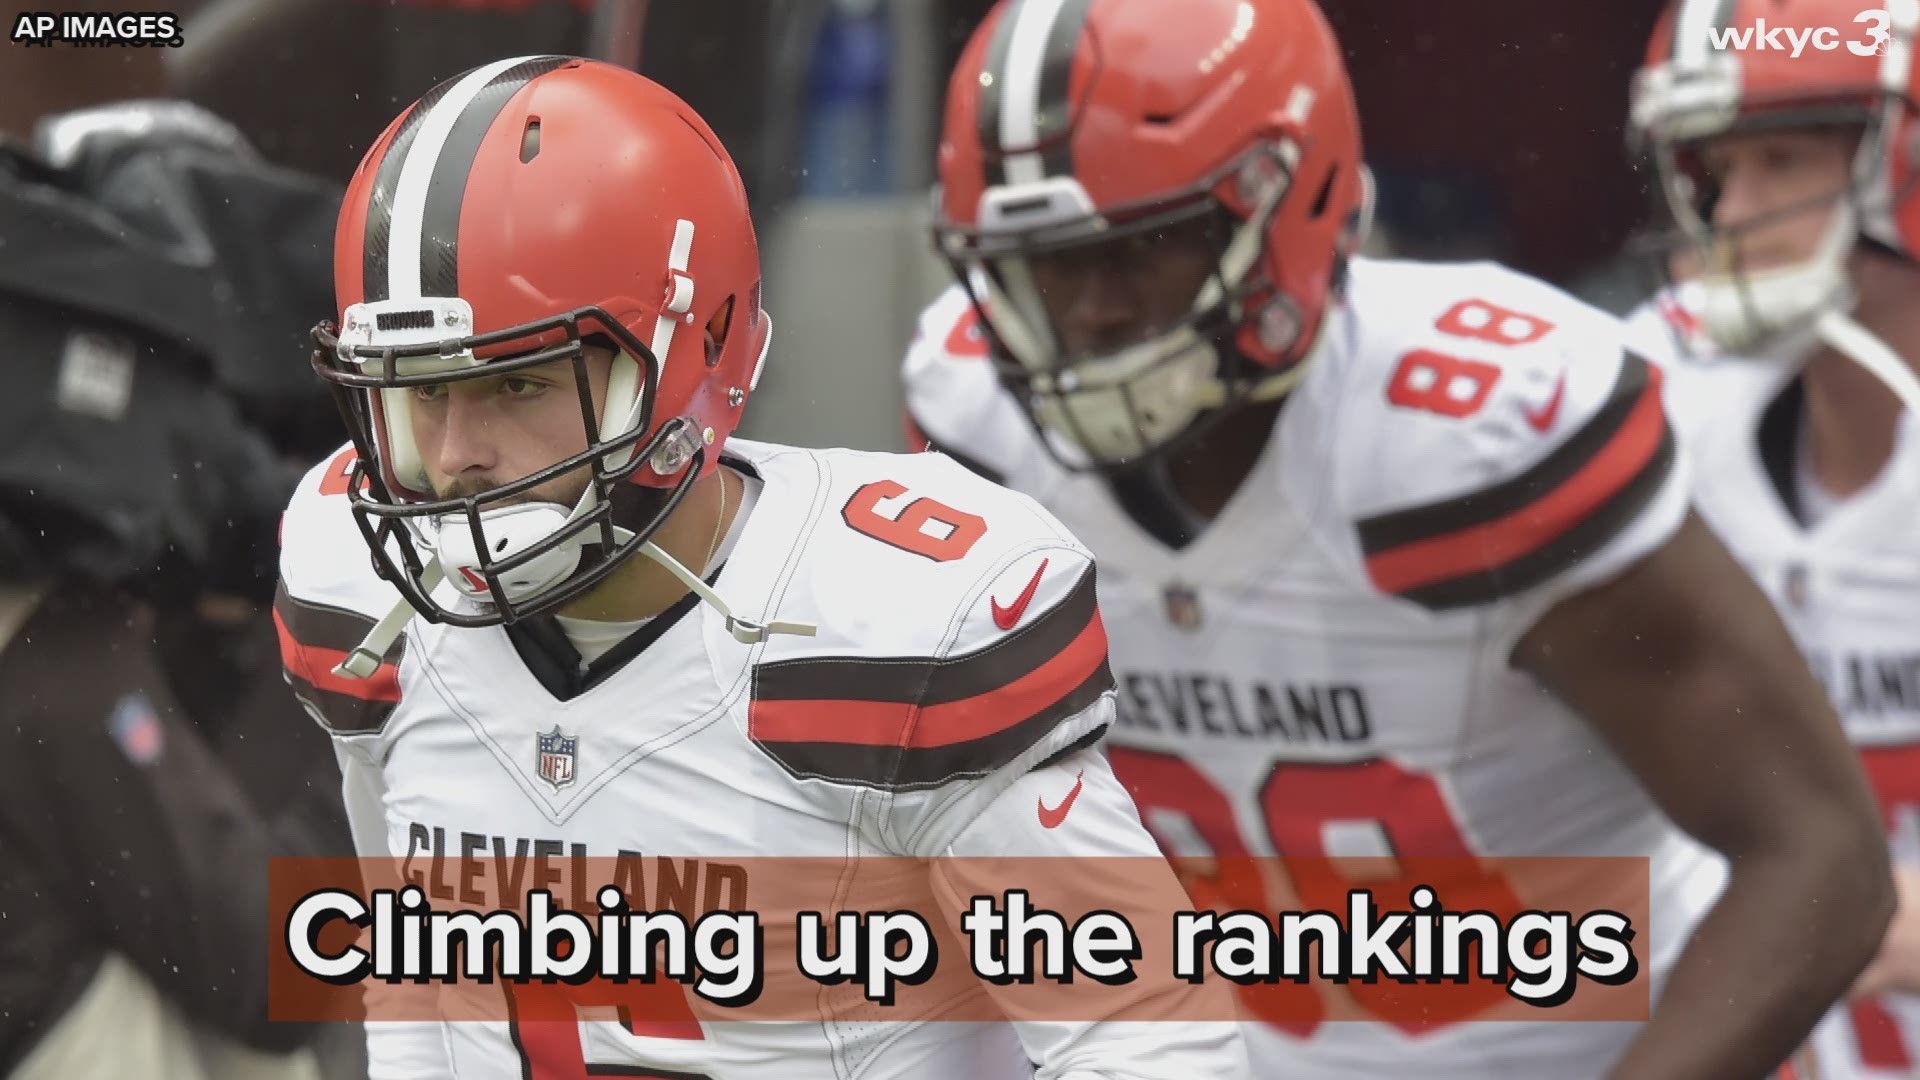 ESPN.com writers believe the Cleveland Browns have a bright future with quarterback Baker Mayfield.